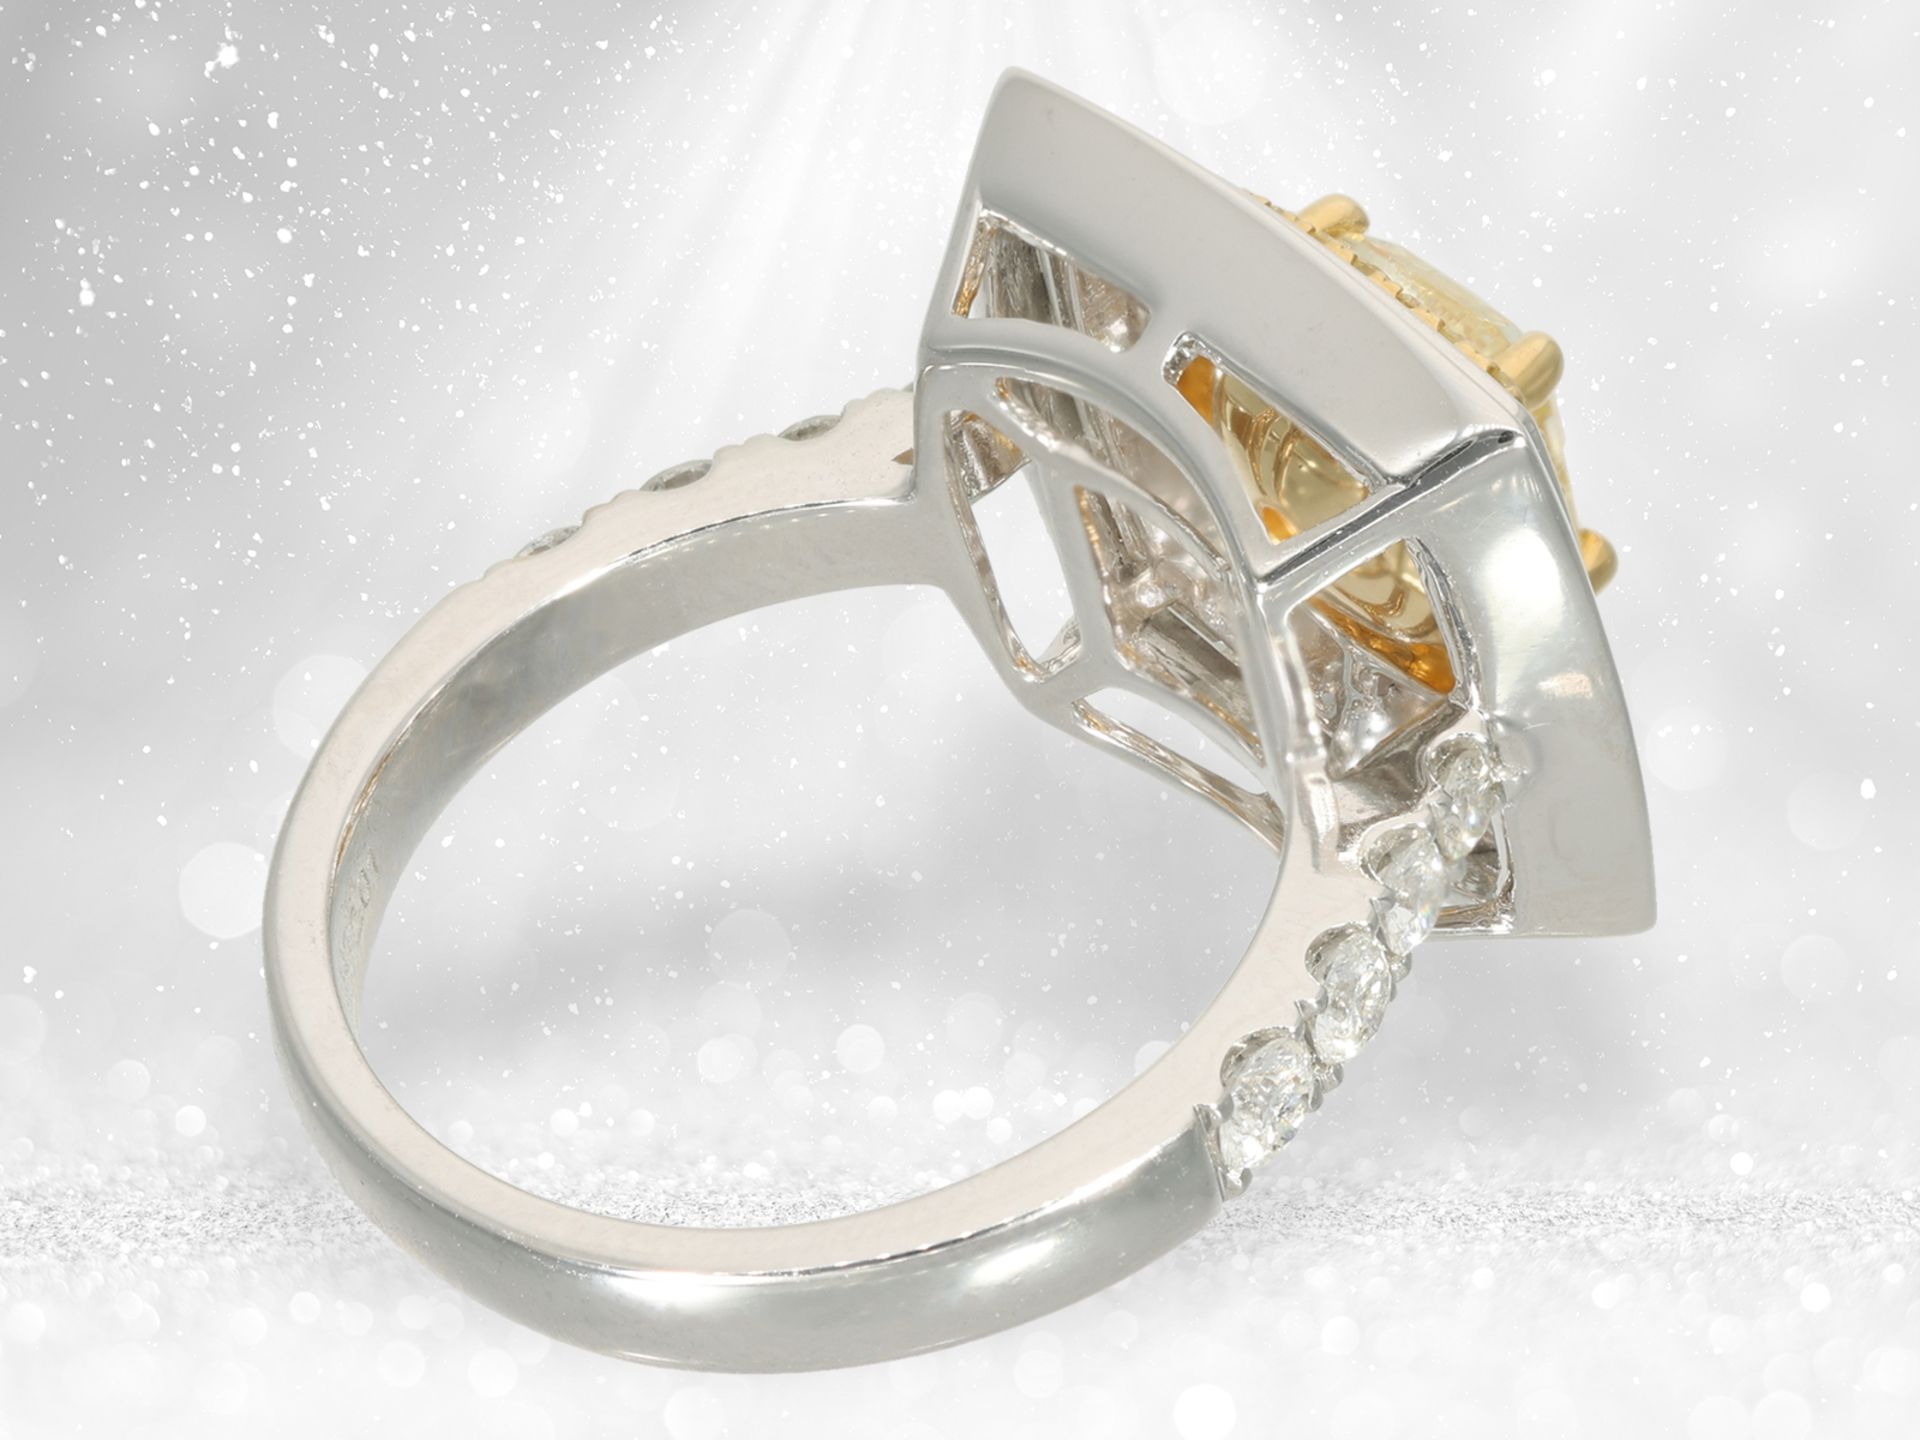 Ring: extremely elaborately crafted diamond ring, centre stone "Yellow Cushion" of 2ct - Image 5 of 5